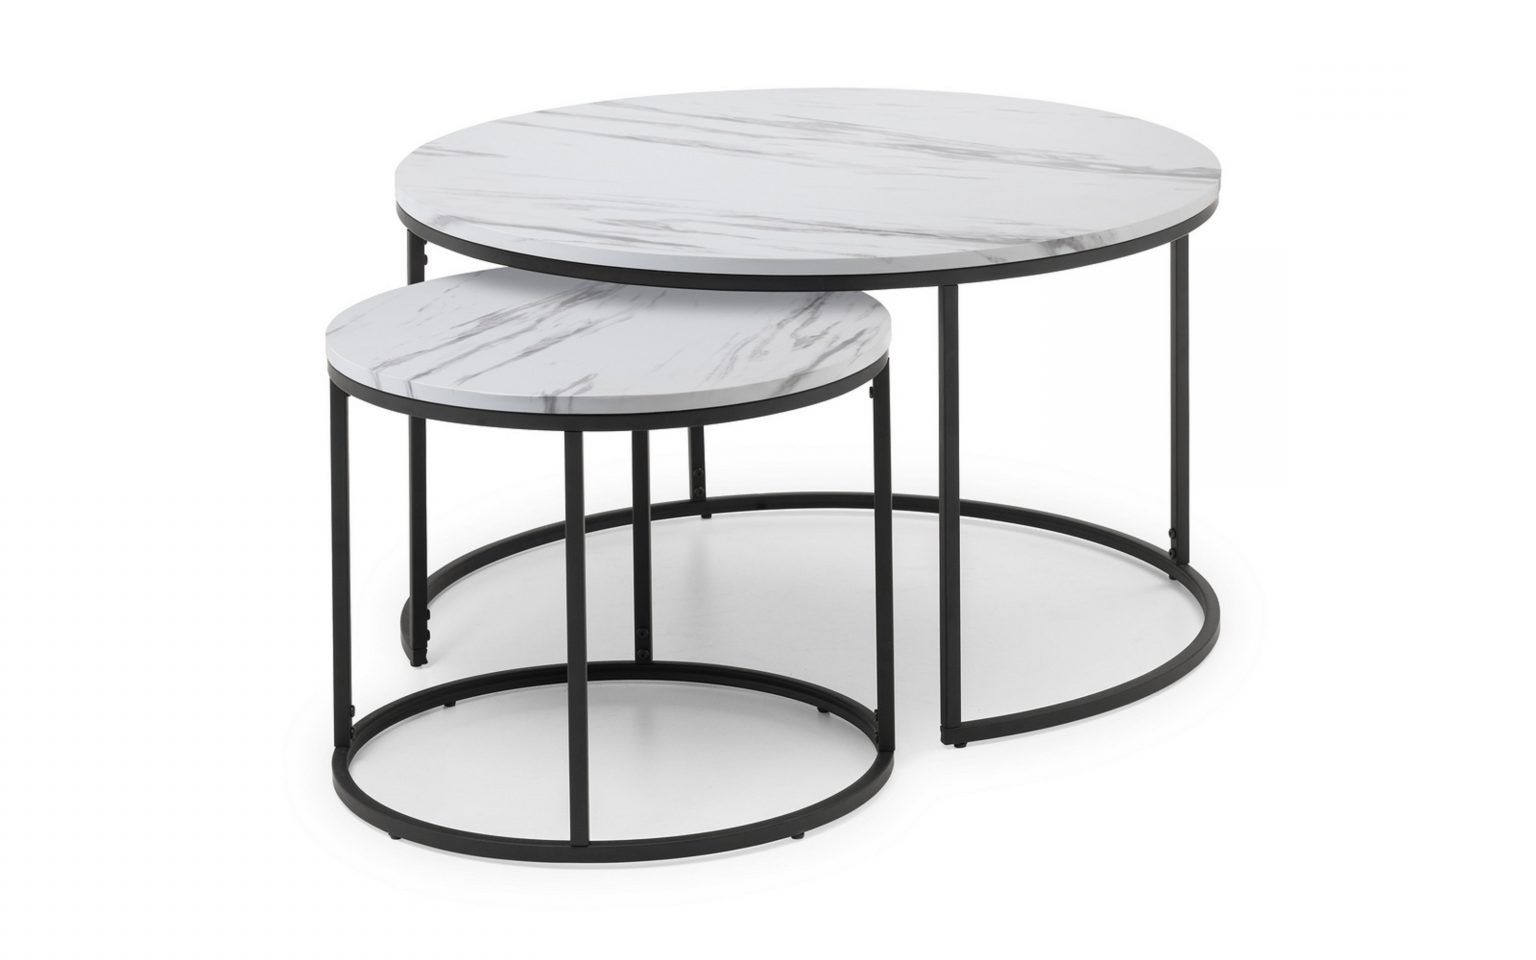 Marble Coffee Tables Set Of 2 Intended For Most Recent Bellini Round Nesting Coffee Table – White Marble – Swfurnishings (View 3 of 10)